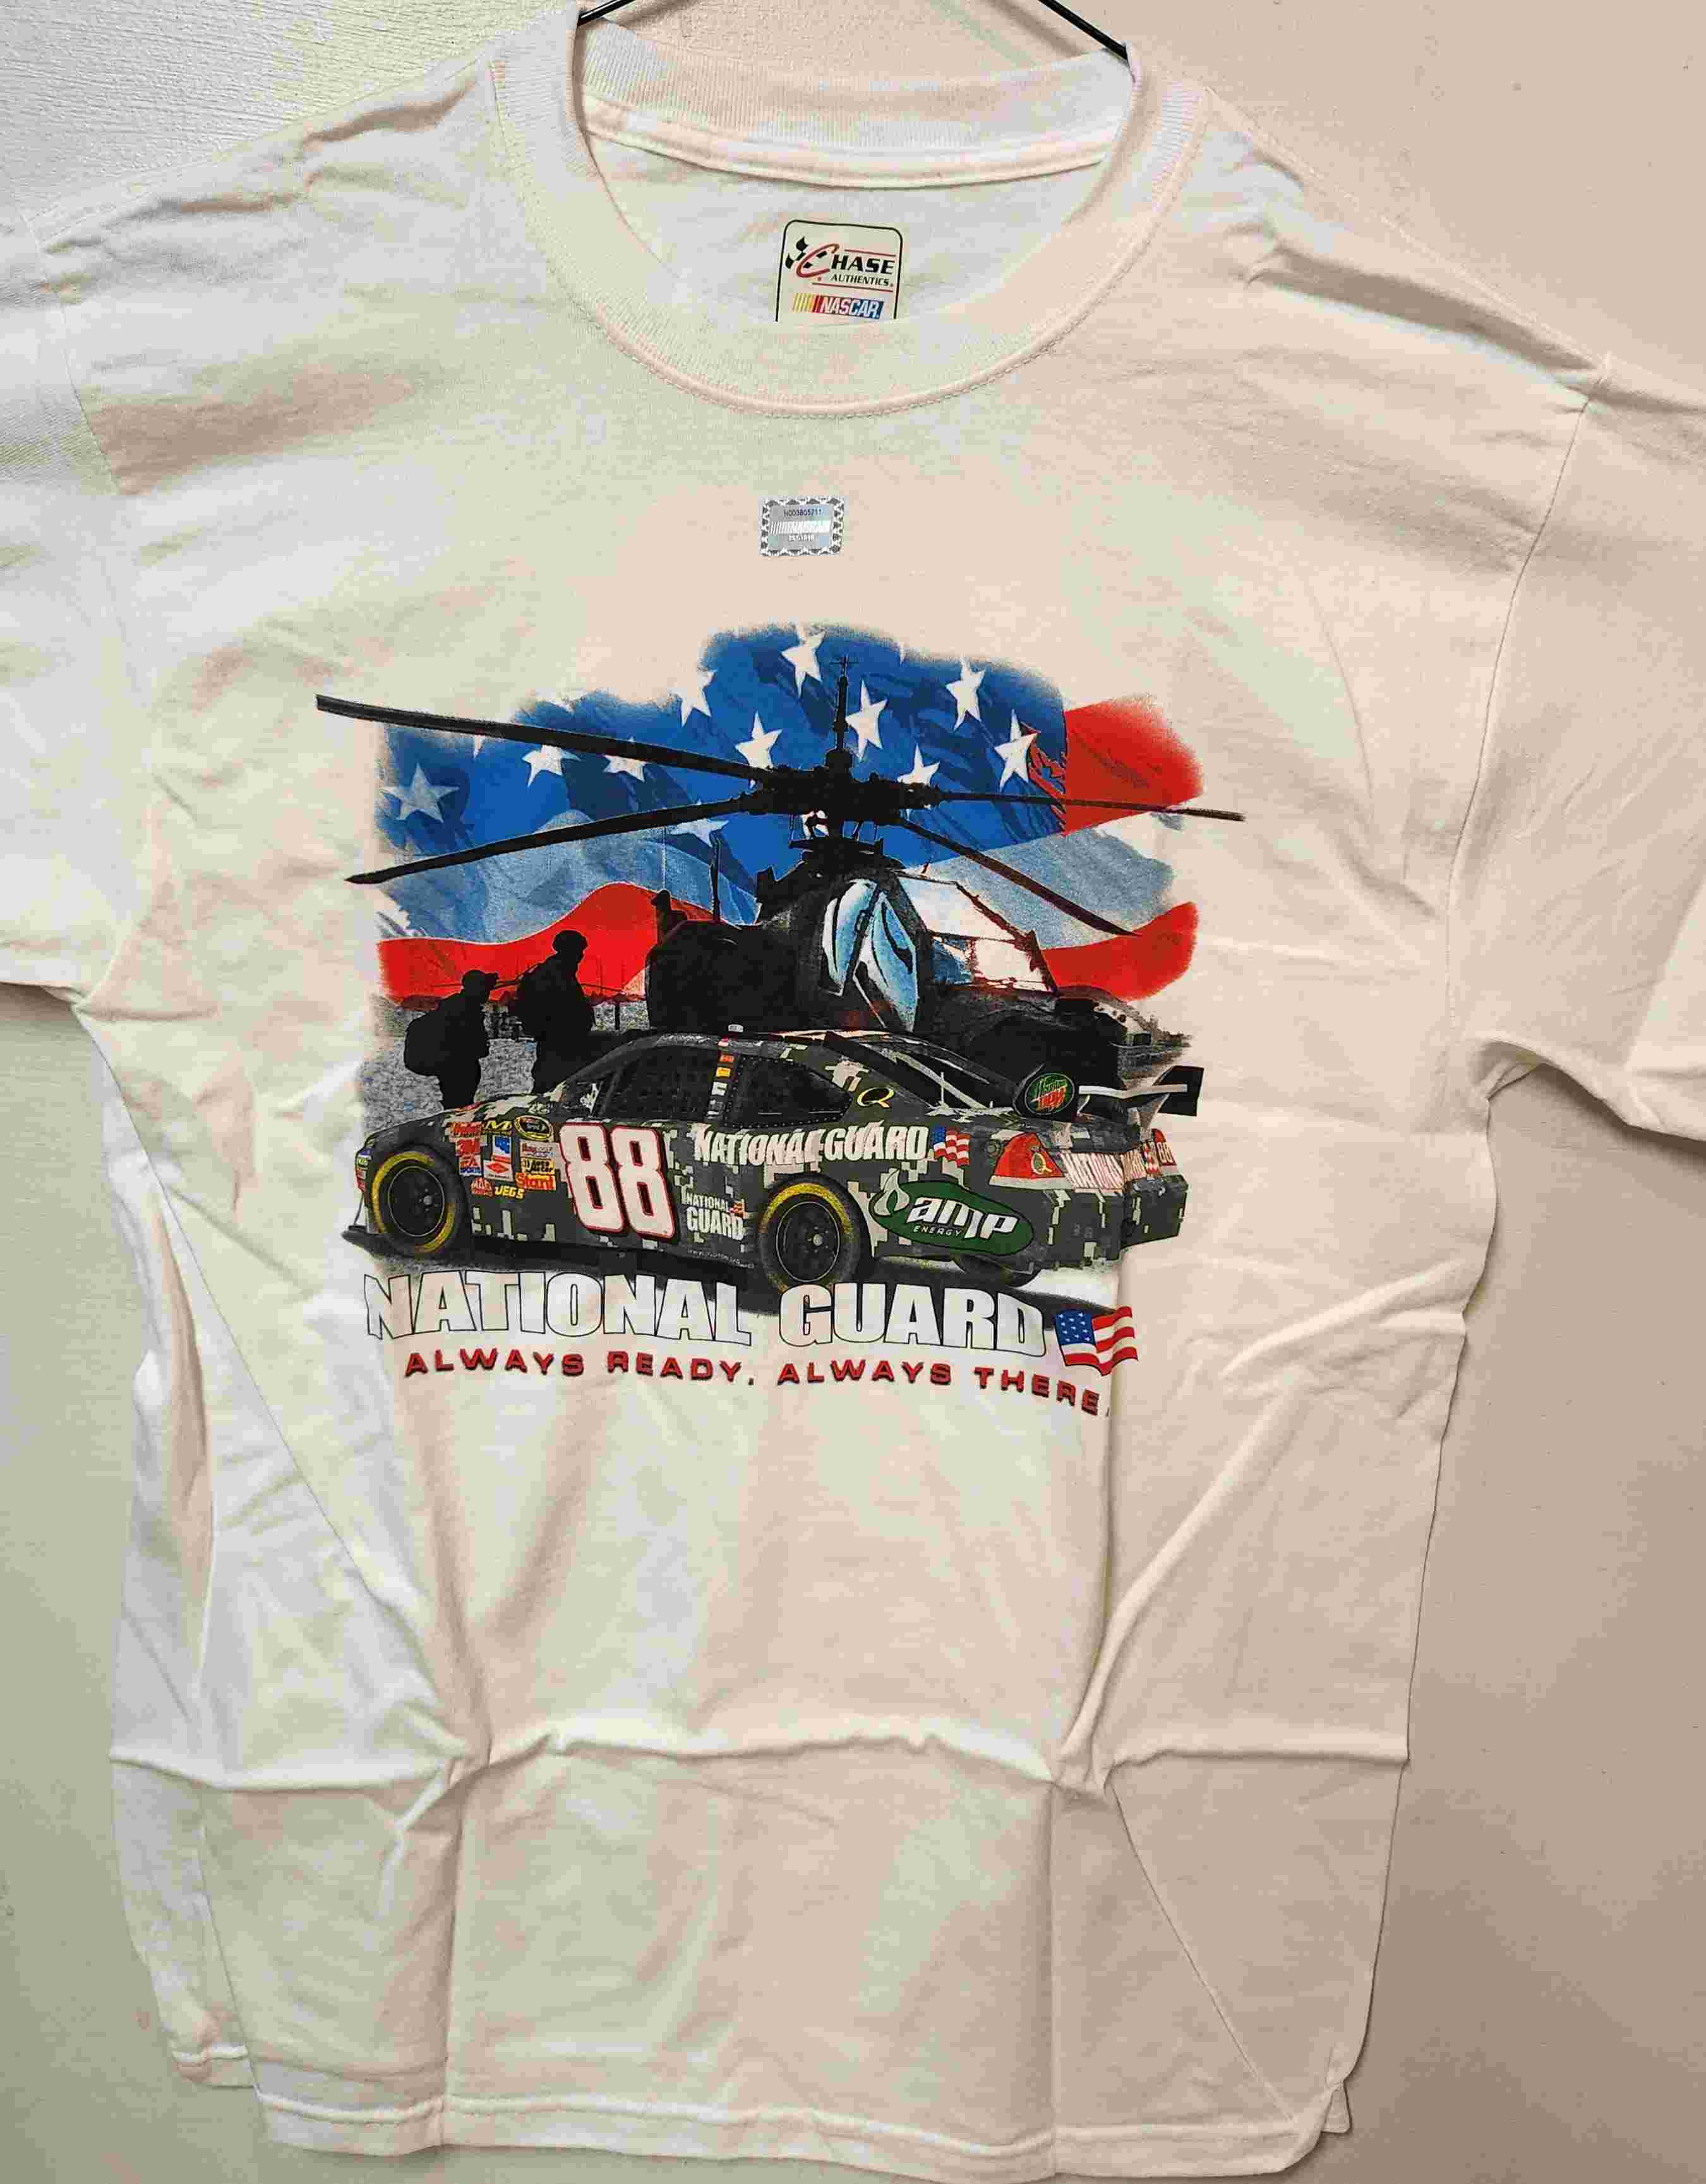 2008 Dale Earnhardt Jr National Guard "Always Ready Always There" white tee